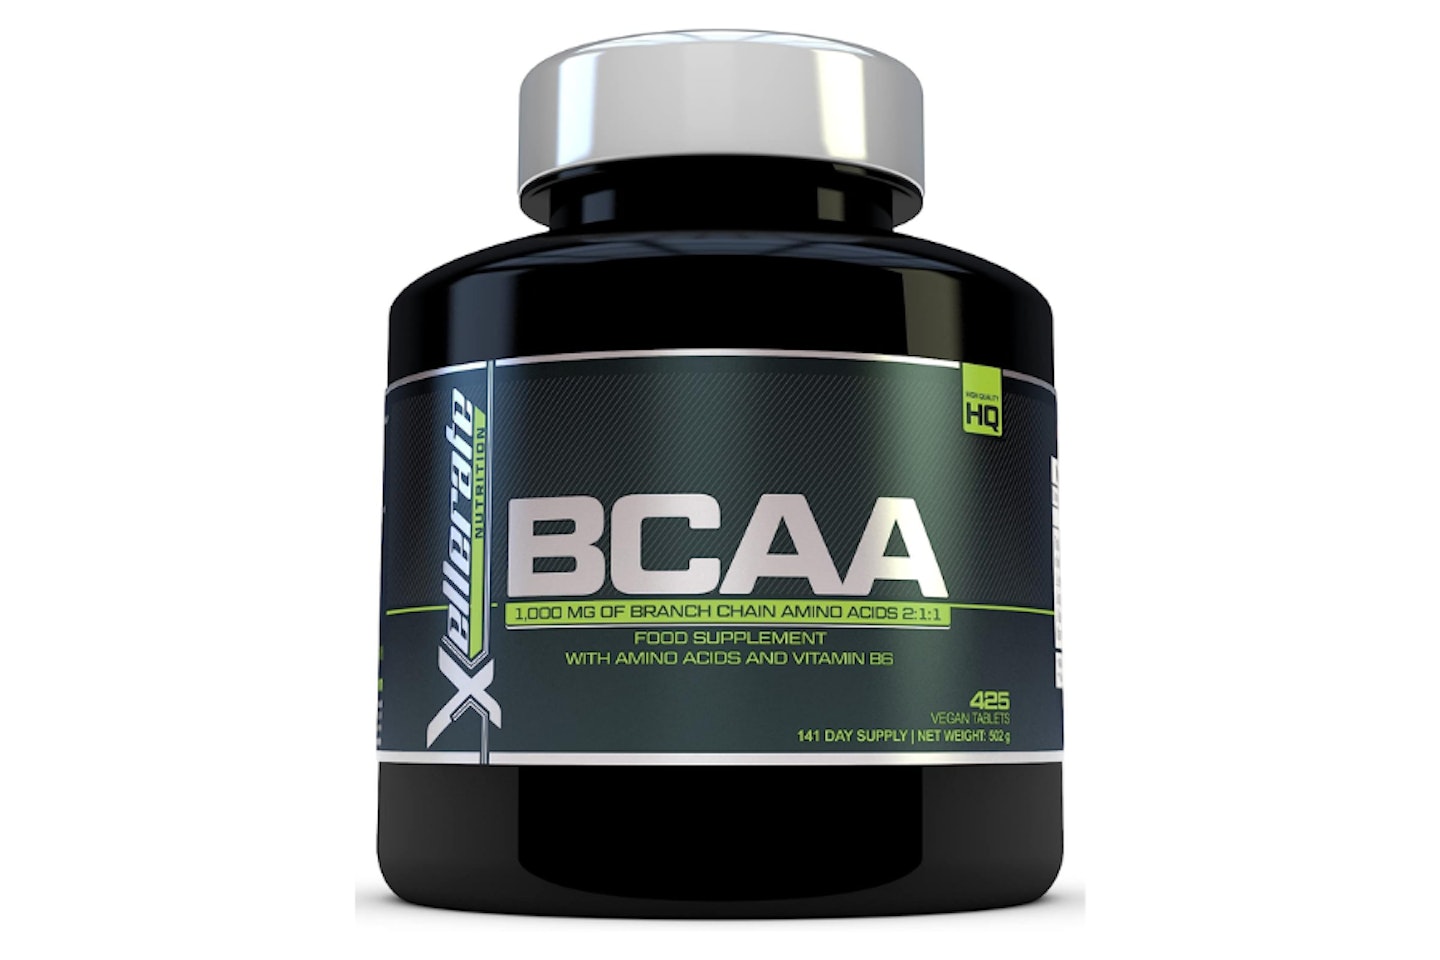 BCAA Tablet 1000mg, 425 Tablets, 3000mg Daily Serving